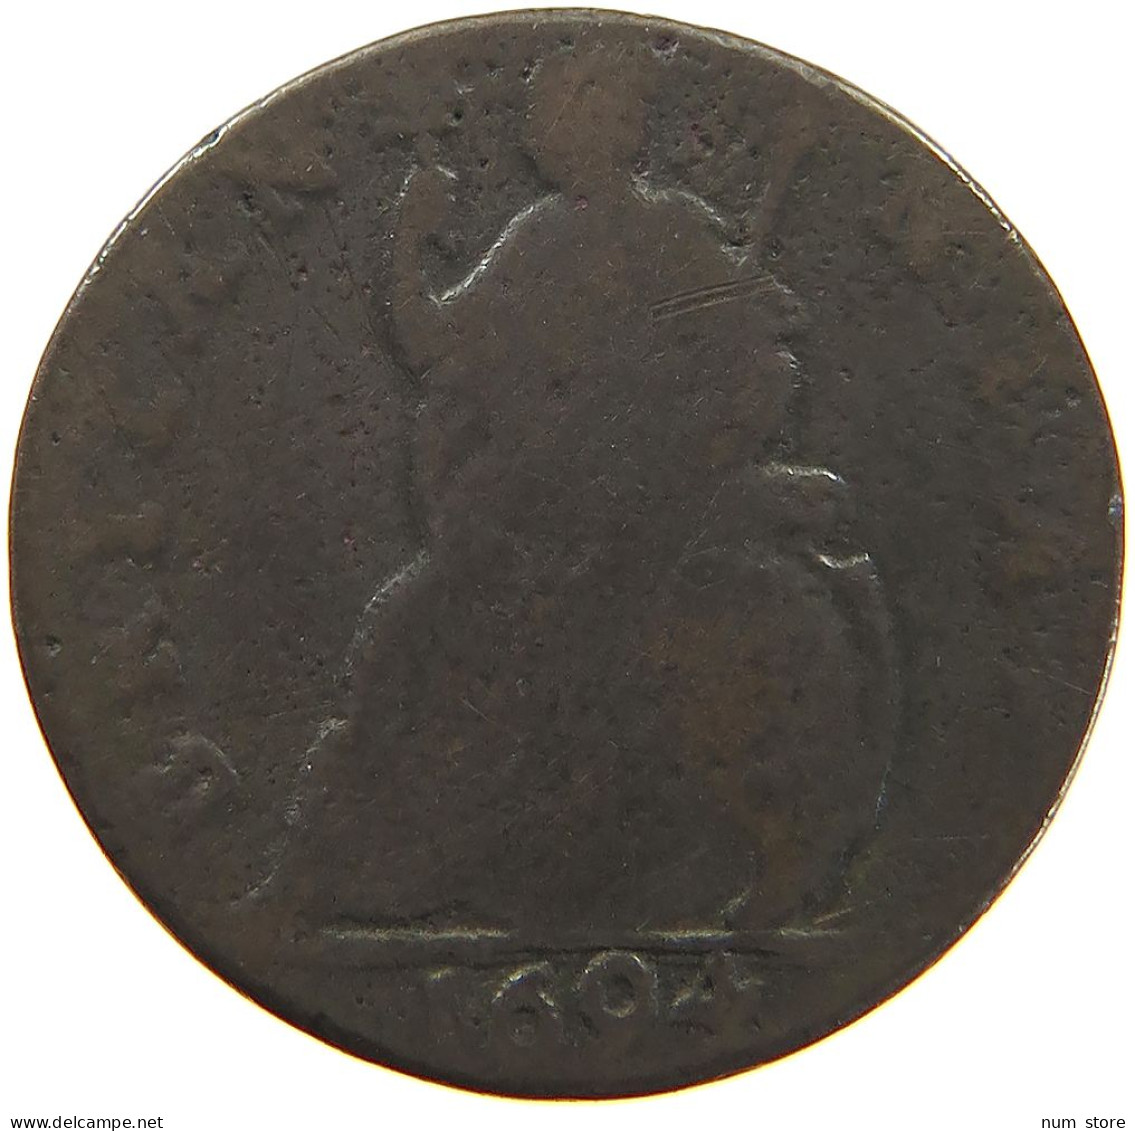 GREAT BRITAIN FARTHING 1694 William & Mary (1689-1694) #t021 0139 - A. 1 Farthing